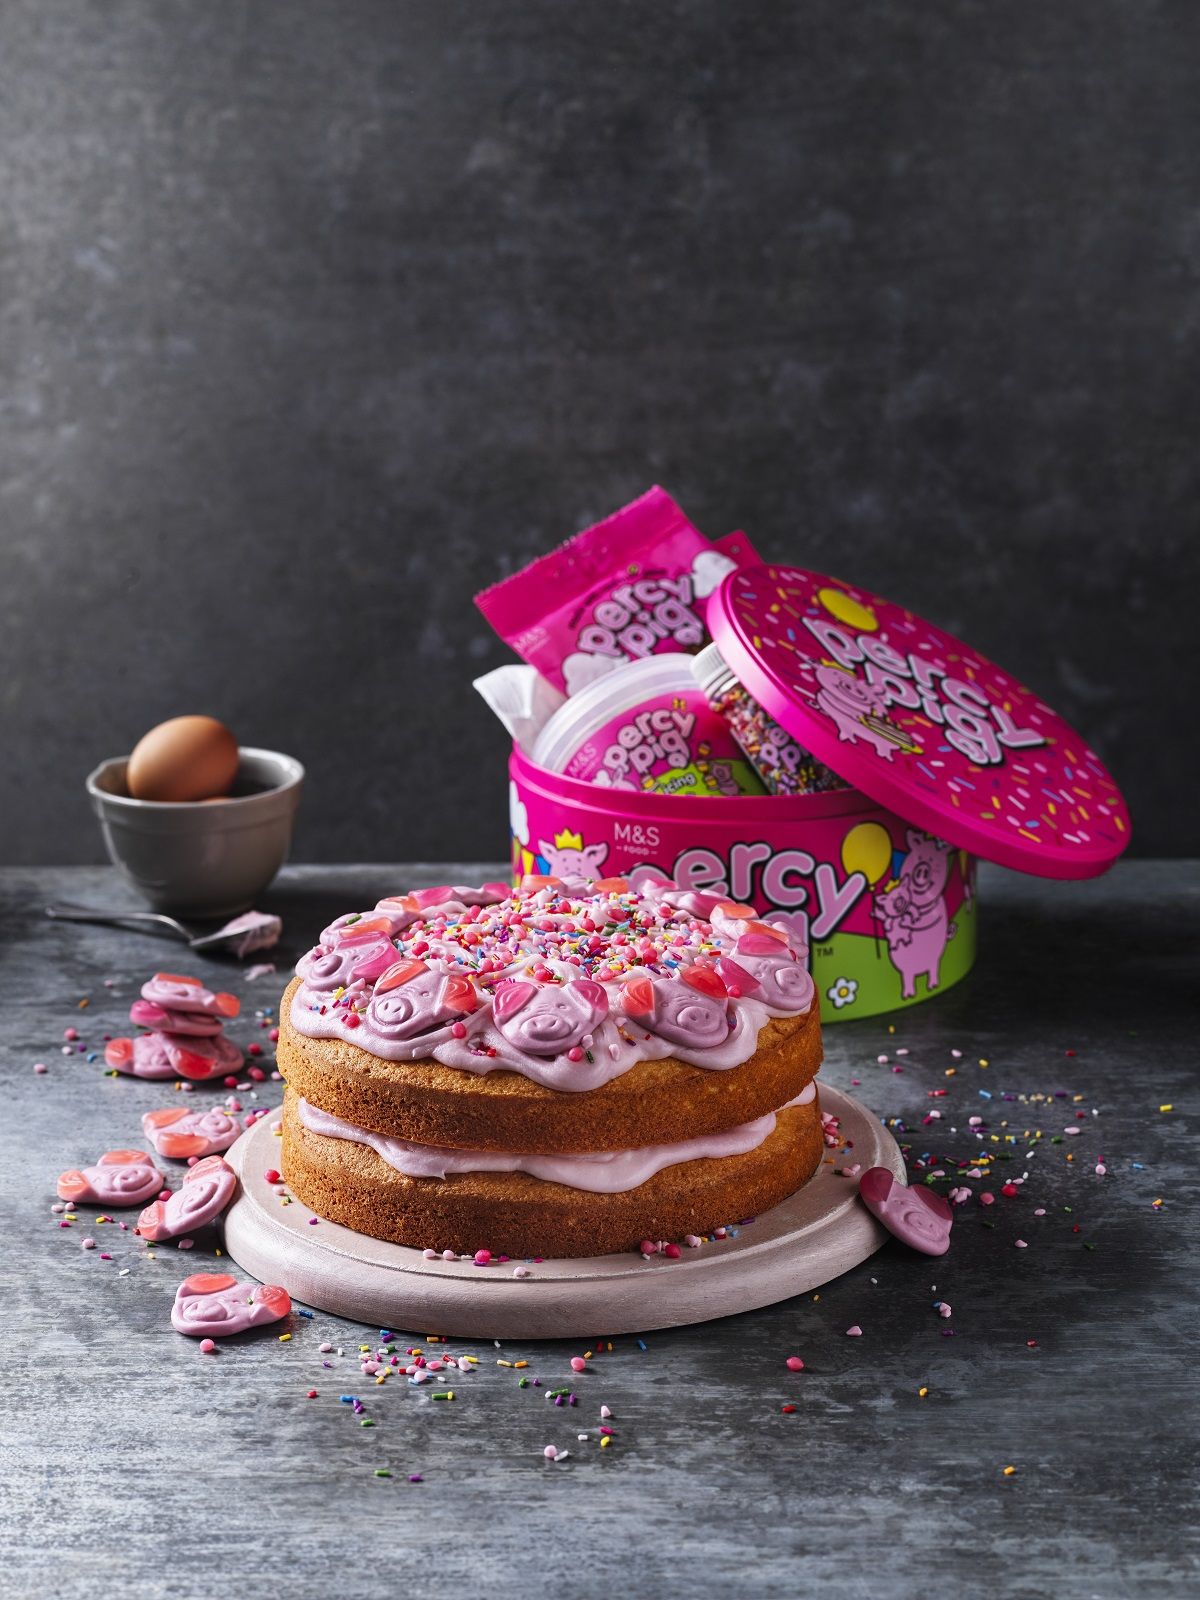 Move over Colin, M&S launch a new must-have birthday cake